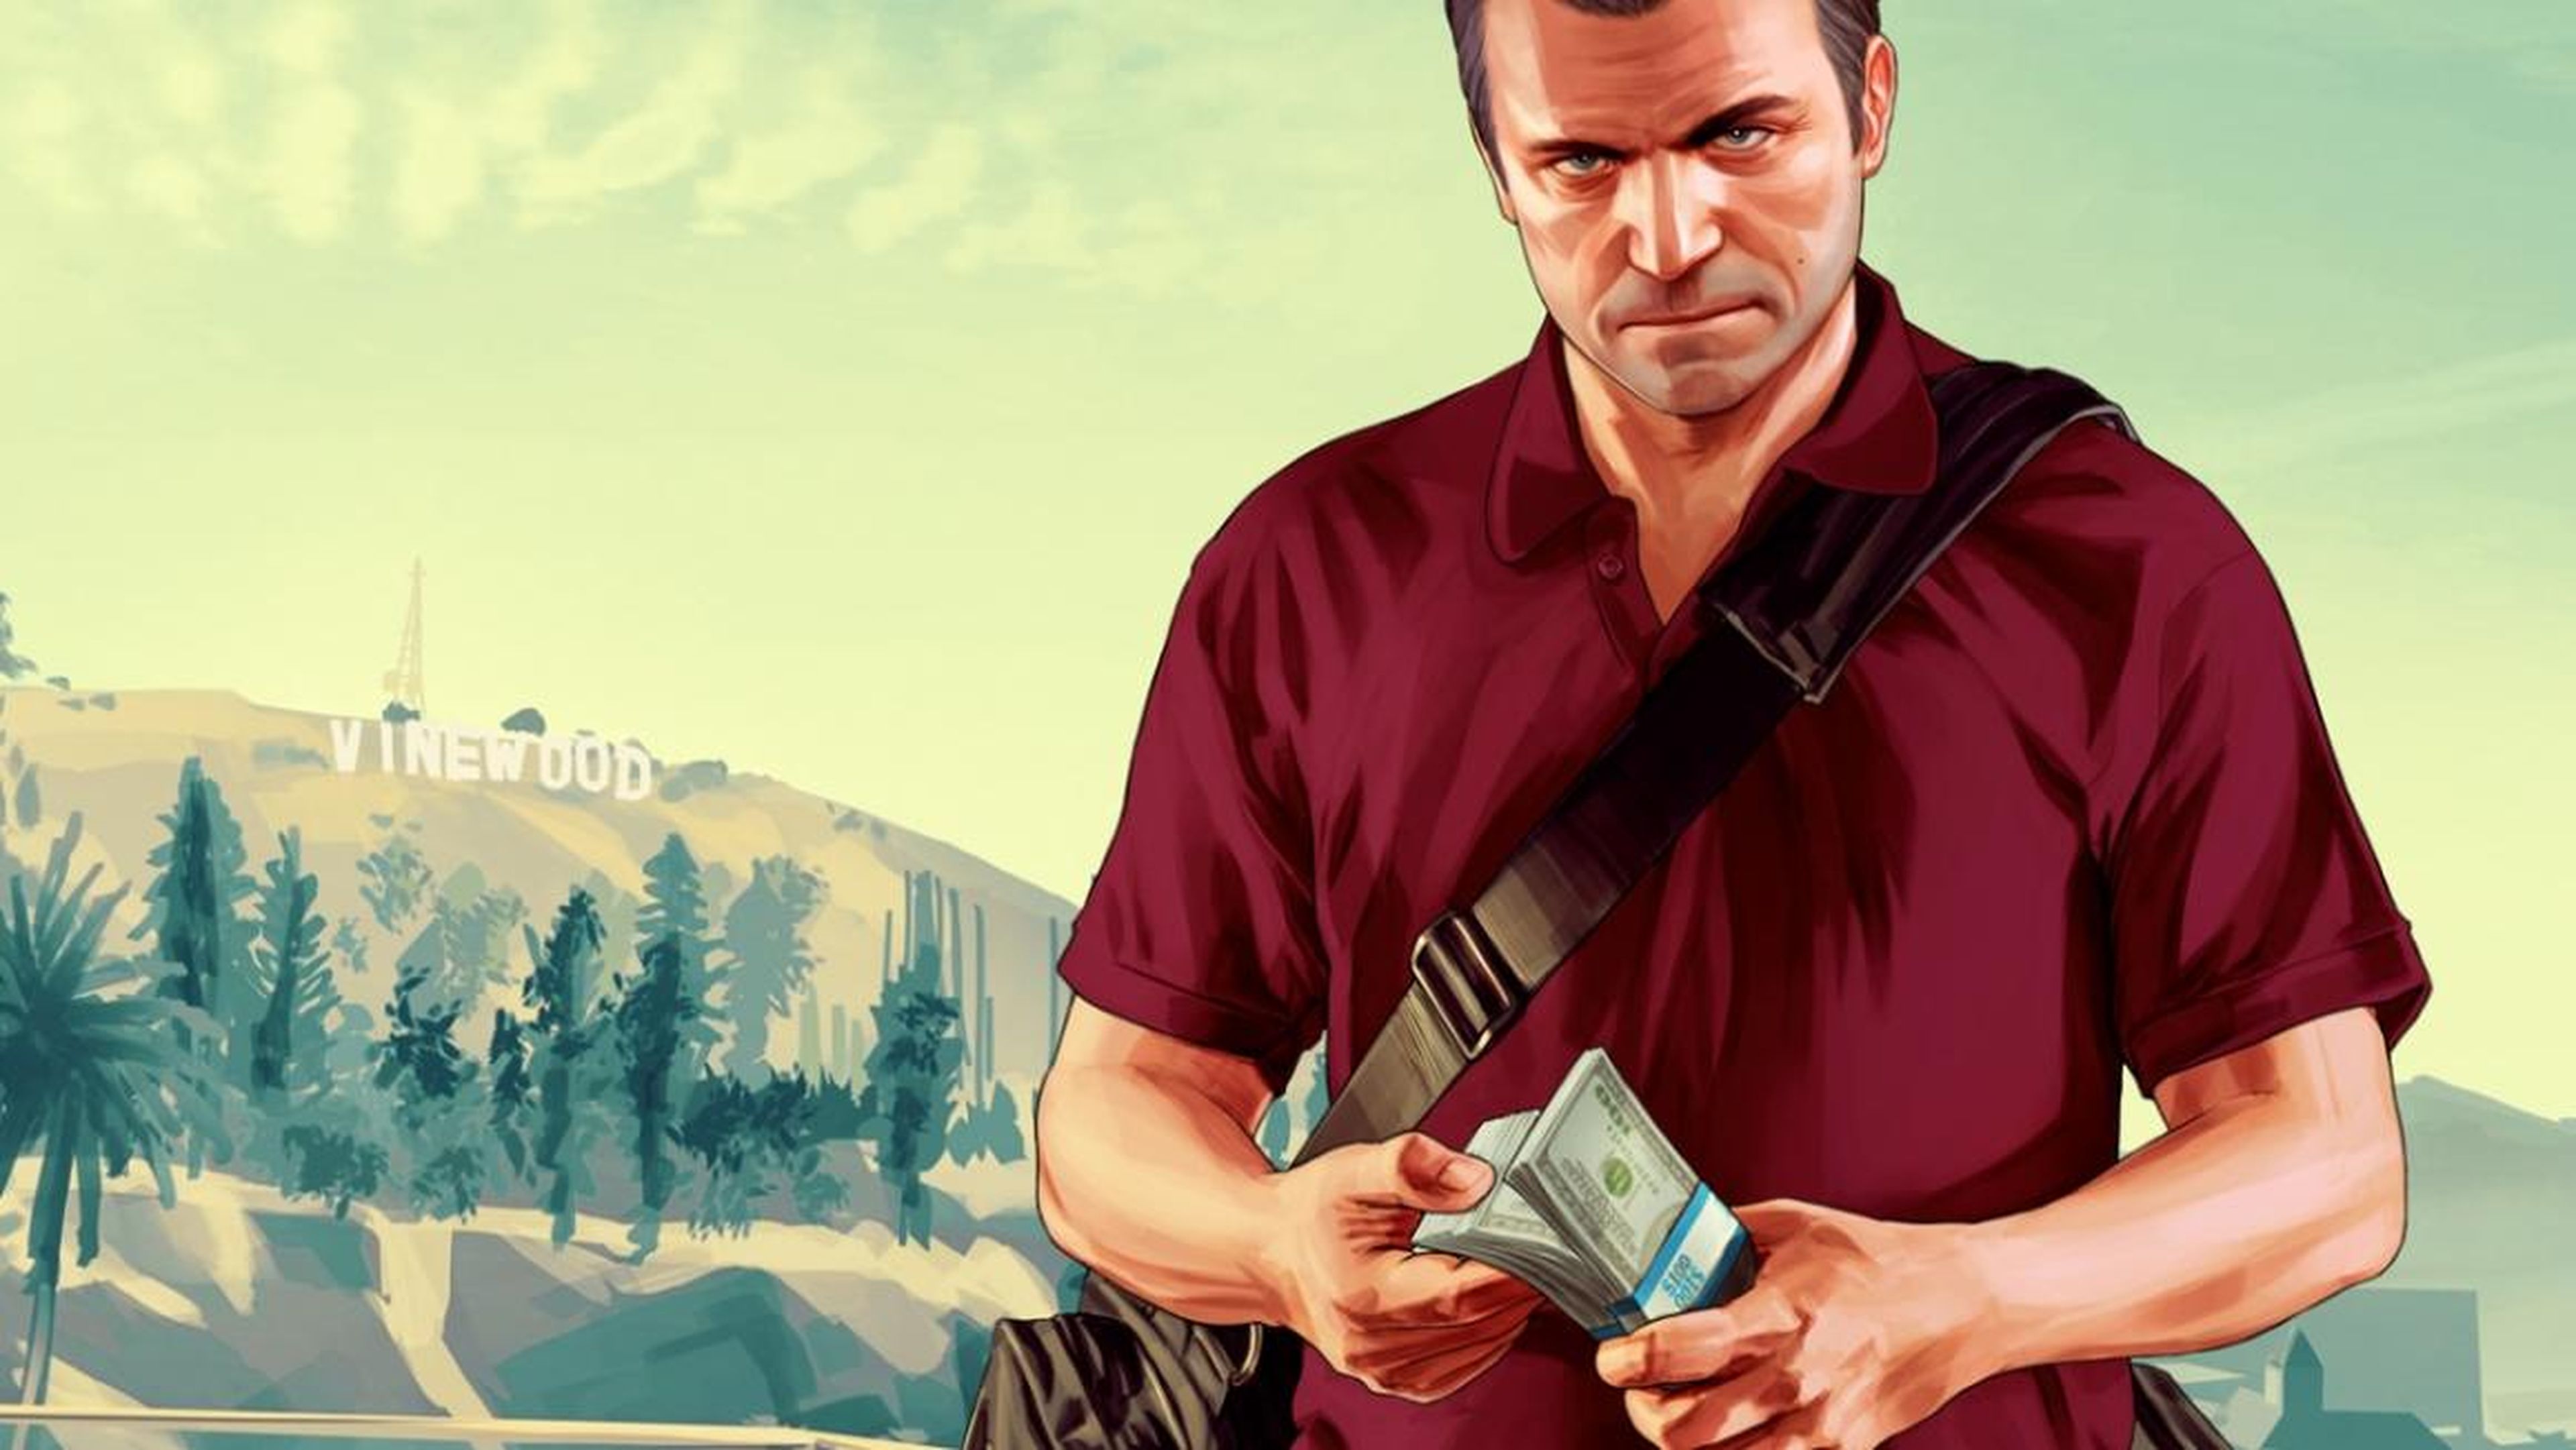 Take-Two Interactive is responsible for publishing major franchises like "Grand Theft Auto," "Red Dead Redemption," and "NBA 2K," among many others.